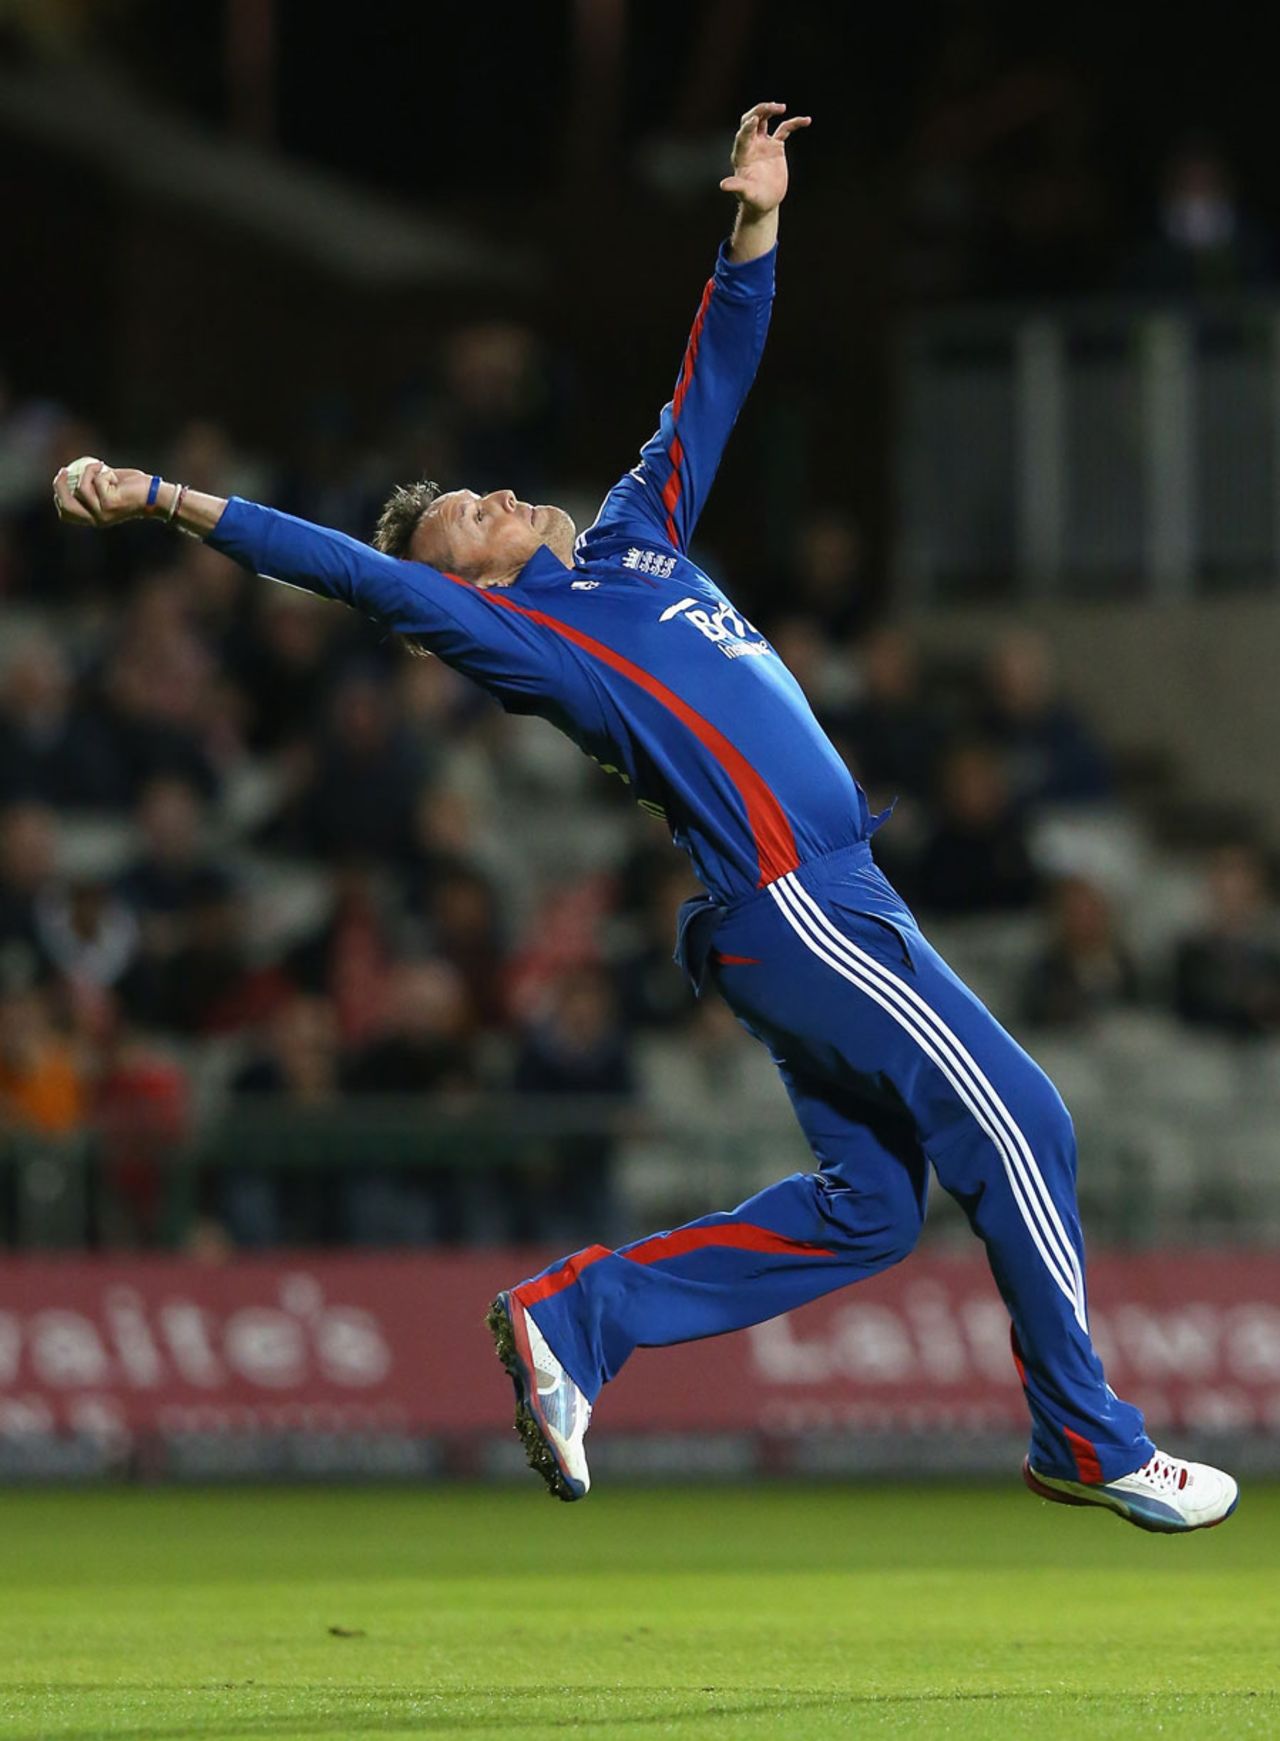 Graeme Swann clings on to a spectacular catch off his own bowling, England v South Africa, 2nd NatWest T20I, Old Trafford, September 10, 2012